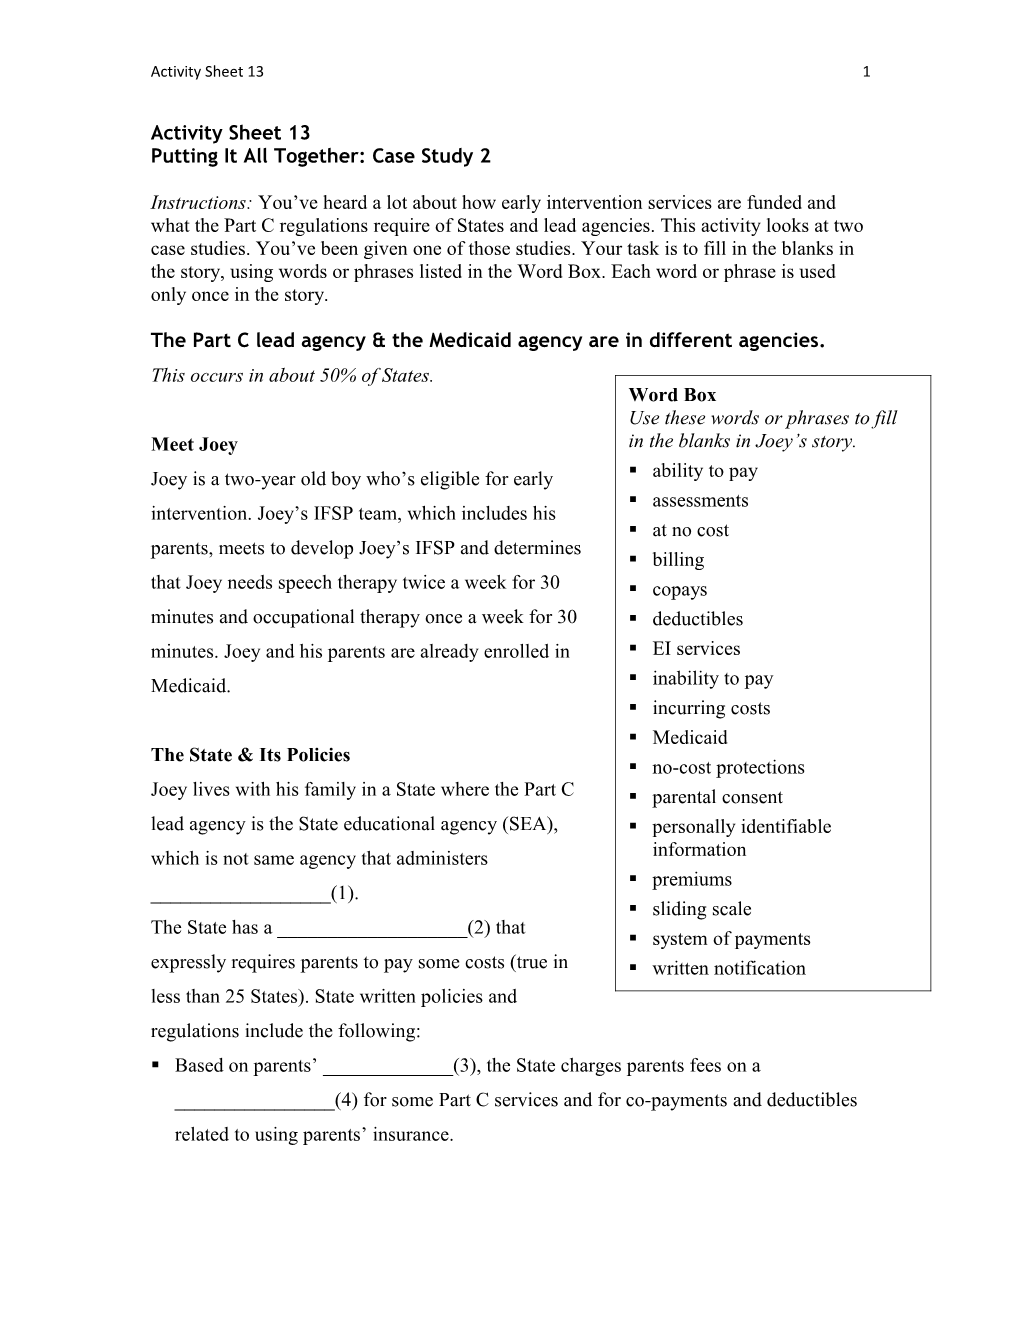 Activity Sheets for Module 18 Use of Part C Funds